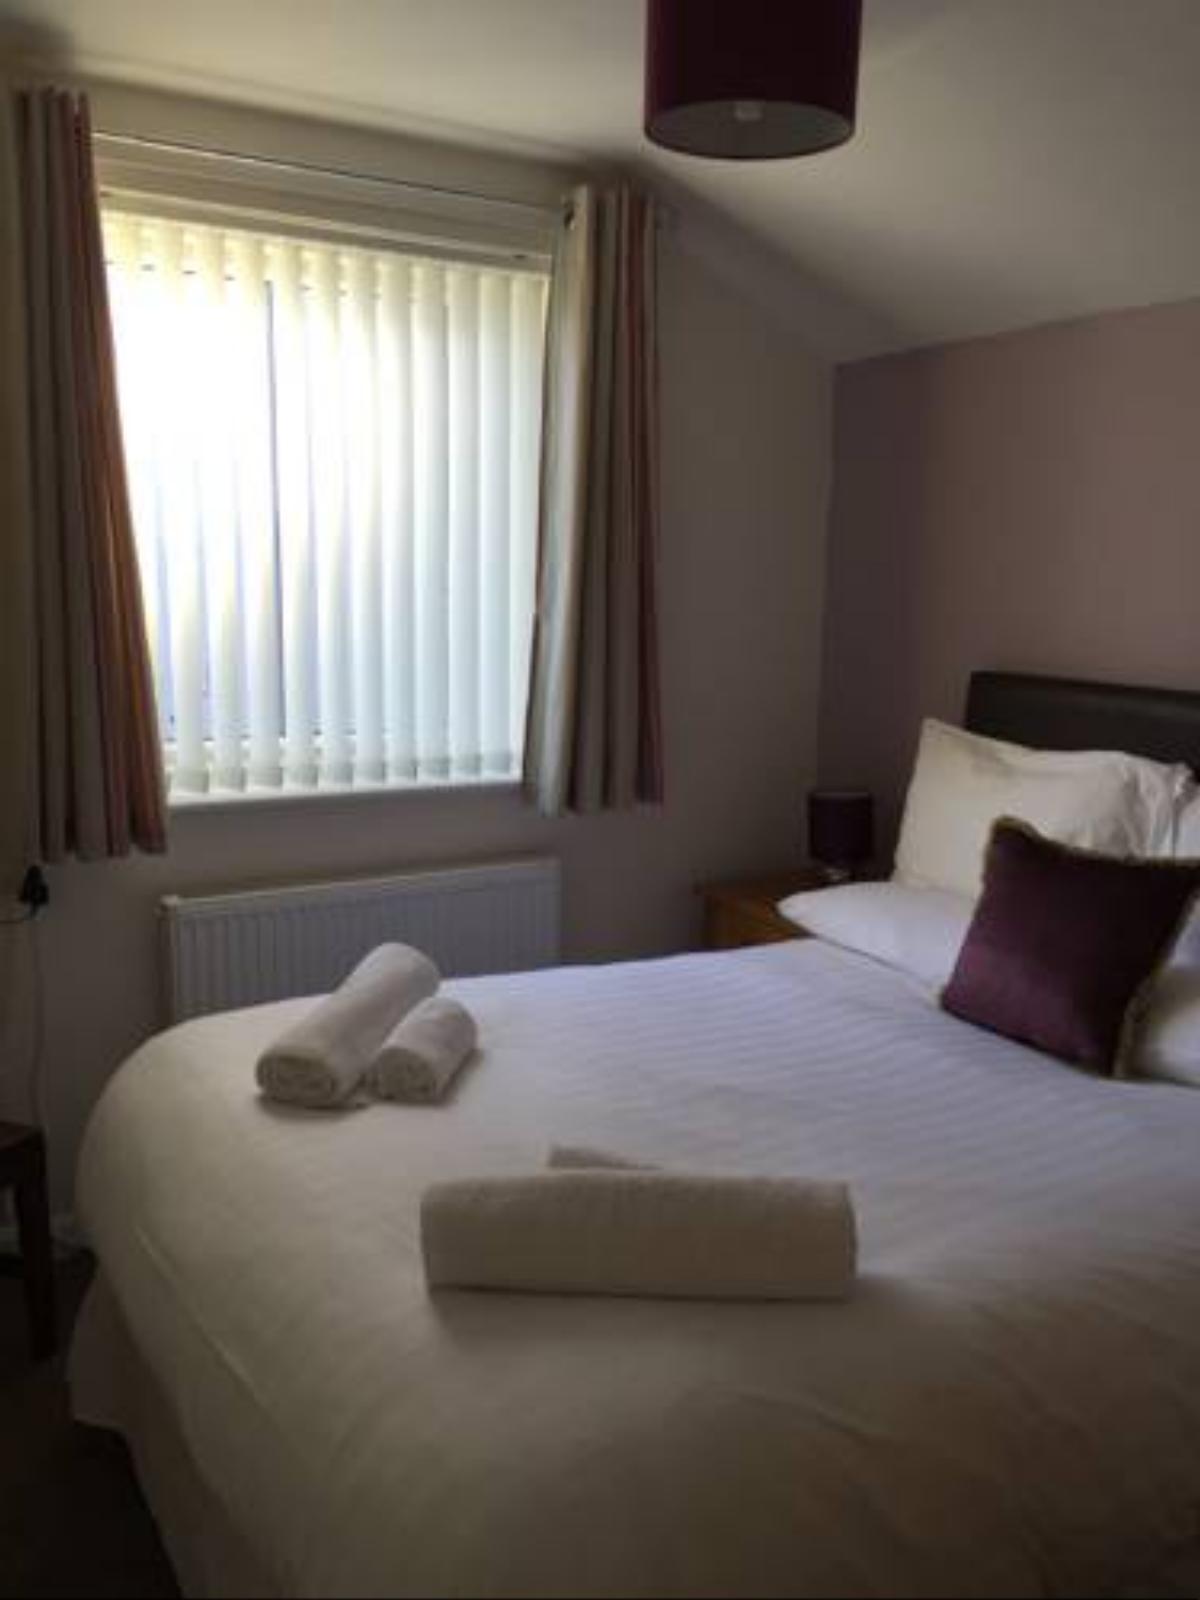 Rose Cottage Guest House Hotel Cockermouth United Kingdom